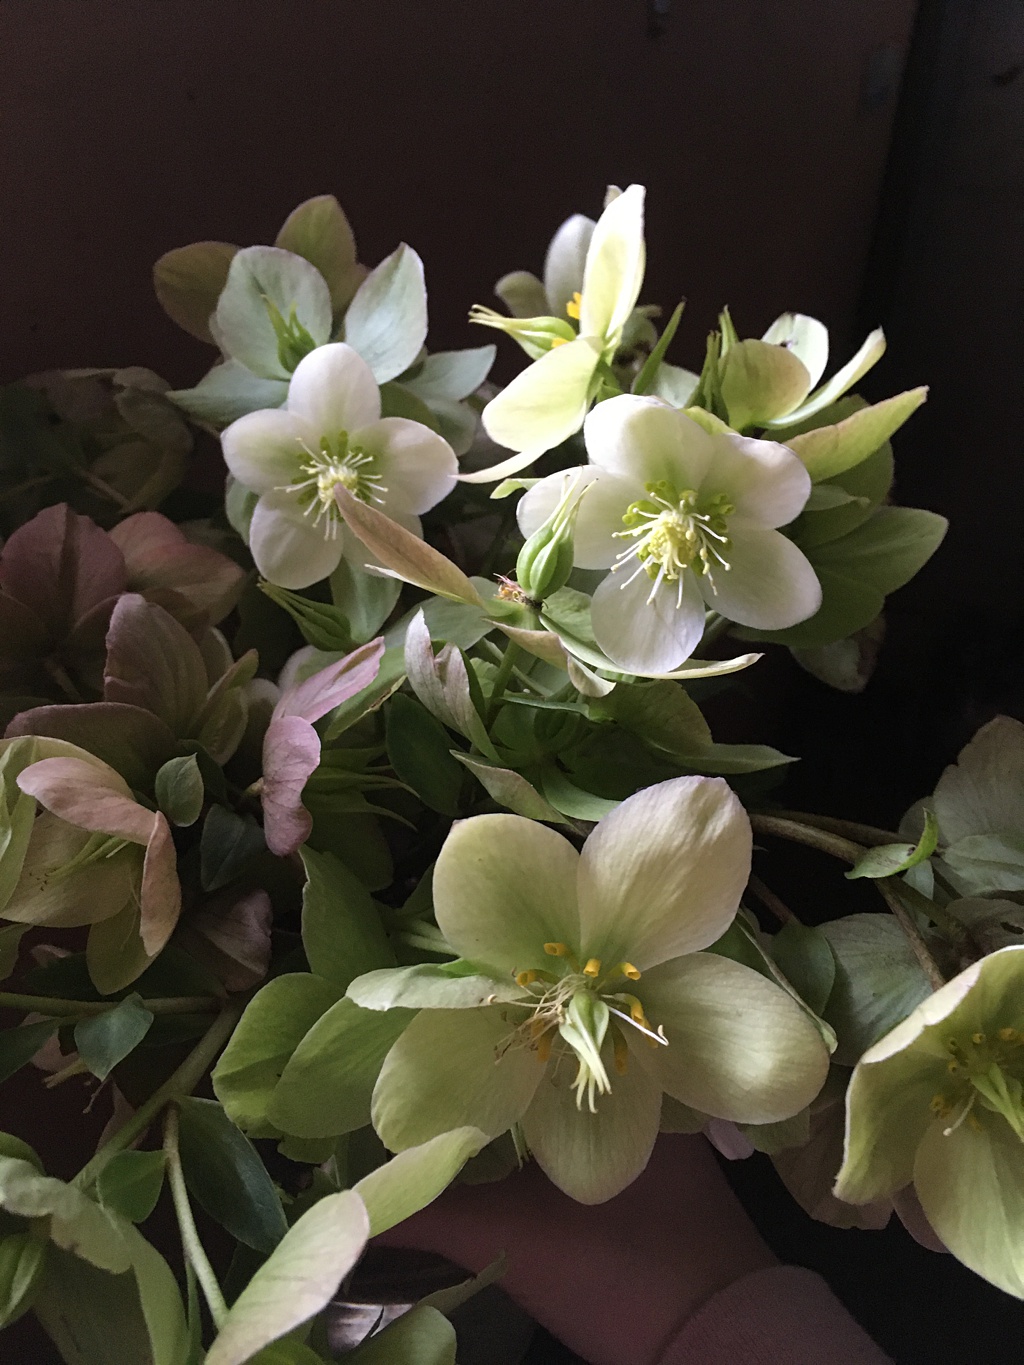 A bunch of green and white hellebores